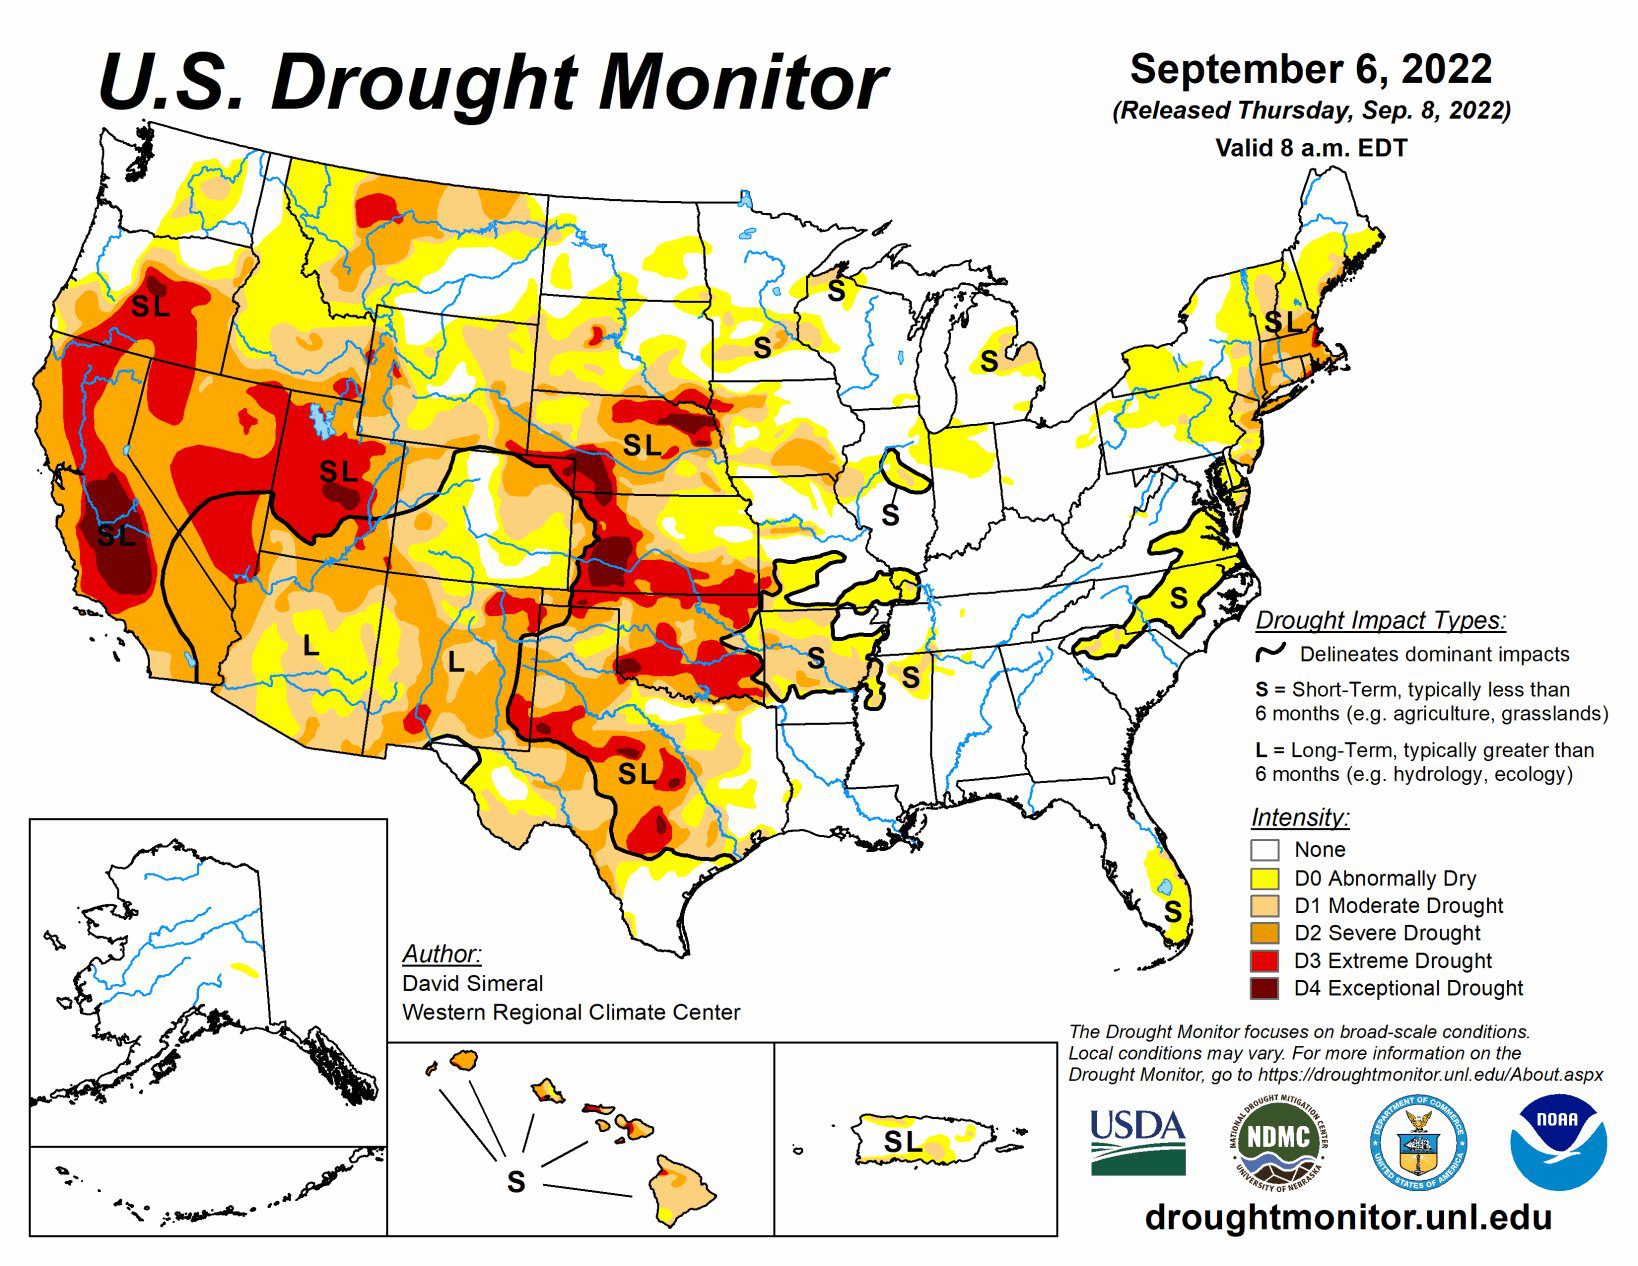 Drought Conditions in Texas Improve